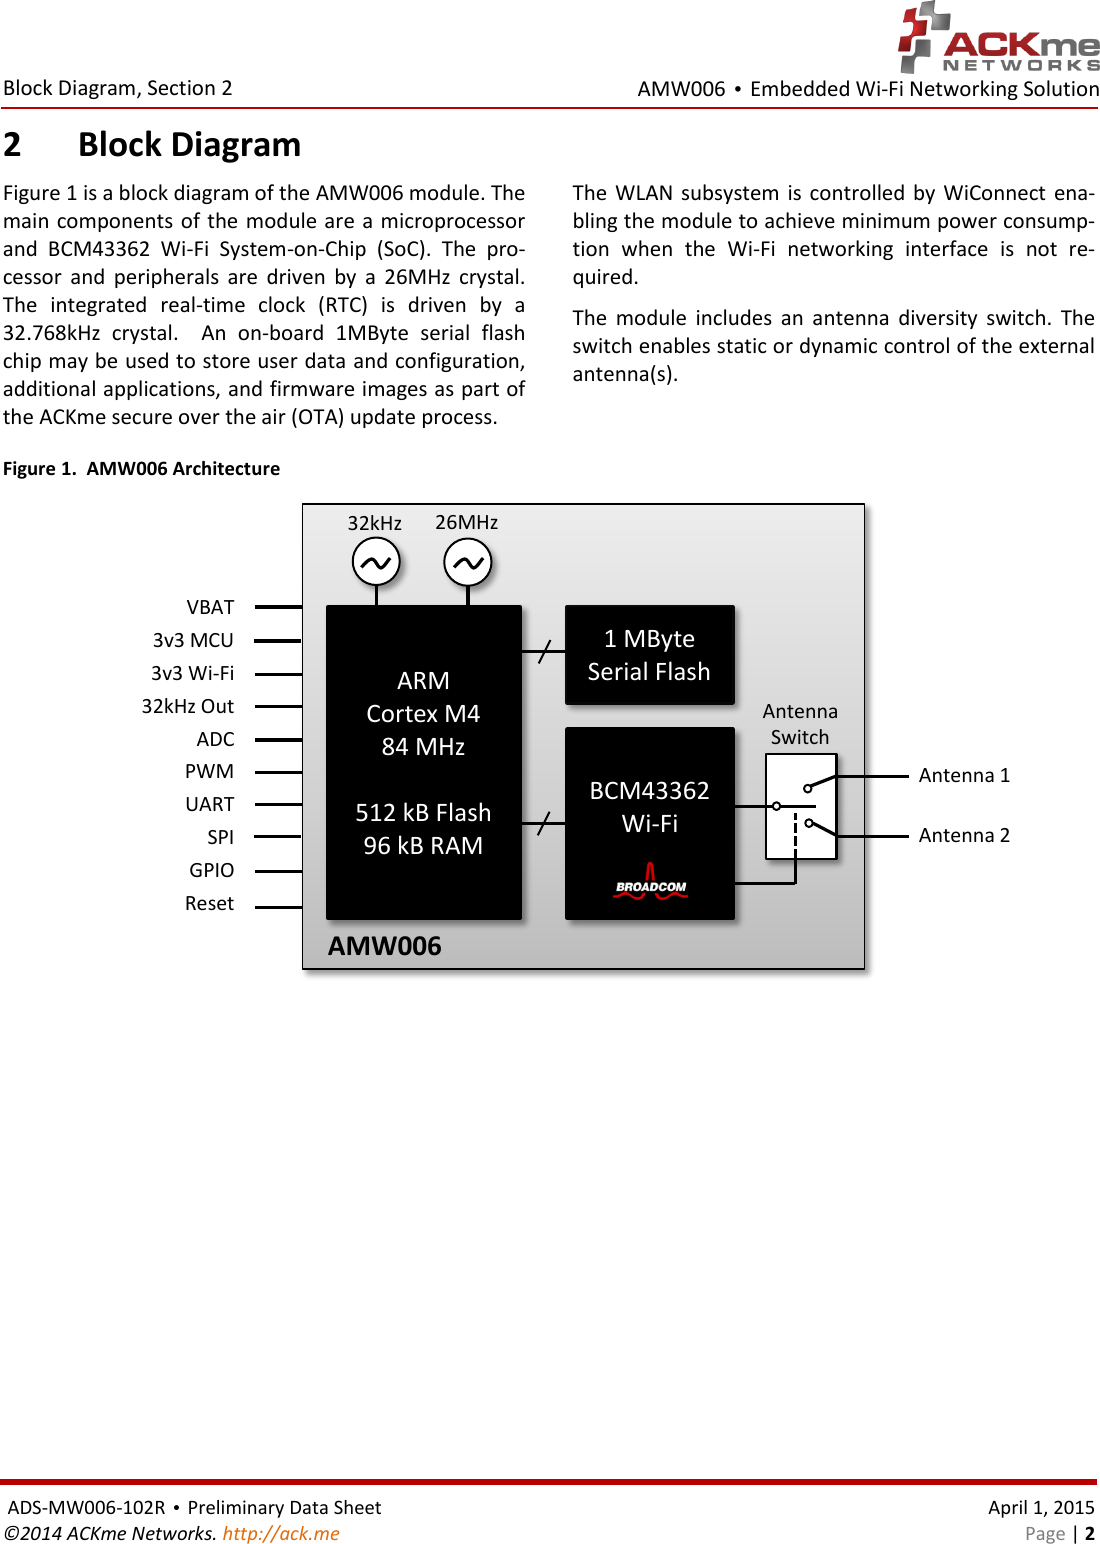 AMW006 • Embedded Wi-Fi Networking Solution  Block Diagram, Section 2  ADS-MW006-102R • Preliminary Data Sheet    April 1, 2015 ©2014 ACKme Networks. http://ack.me    Page | 2 2 Block DiagramFigure 1 is a block diagram of the AMW006 module. The main components of  the module are  a microprocessor and  BCM43362  Wi-Fi  System-on-Chip  (SoC).  The  pro-cessor  and  peripherals  are  driven  by  a  26MHz  crystal. The  integrated  real-time  clock  (RTC)  is  driven  by  a 32.768kHz  crystal.   An  on-board  1MByte  serial  flash chip may be used to store user data and configuration, additional applications, and firmware images as part of the ACKme secure over the air (OTA) update process. The WLAN  subsystem is  controlled by WiConnect ena-bling the module to achieve minimum power consump-tion  when  the  Wi-Fi  networking  interface  is  not  re-quired.  The  module  includes  an  antenna  diversity  switch.  The switch enables static or dynamic control of the external antenna(s).  Figure 1.  AMW006 Architecture        Antenna Switch VBAT  3v3 MCU 3v3 Wi-Fi 32kHz Out ADC PWM UART SPI GPIO Reset   ARM  Cortex M4 84 MHz  512 kB Flash 96 kB RAM    BCM43362 Wi-Fi     26MHz   32kHz 1 MByte  Serial Flash AMW006 Antenna 1 Antenna 2 